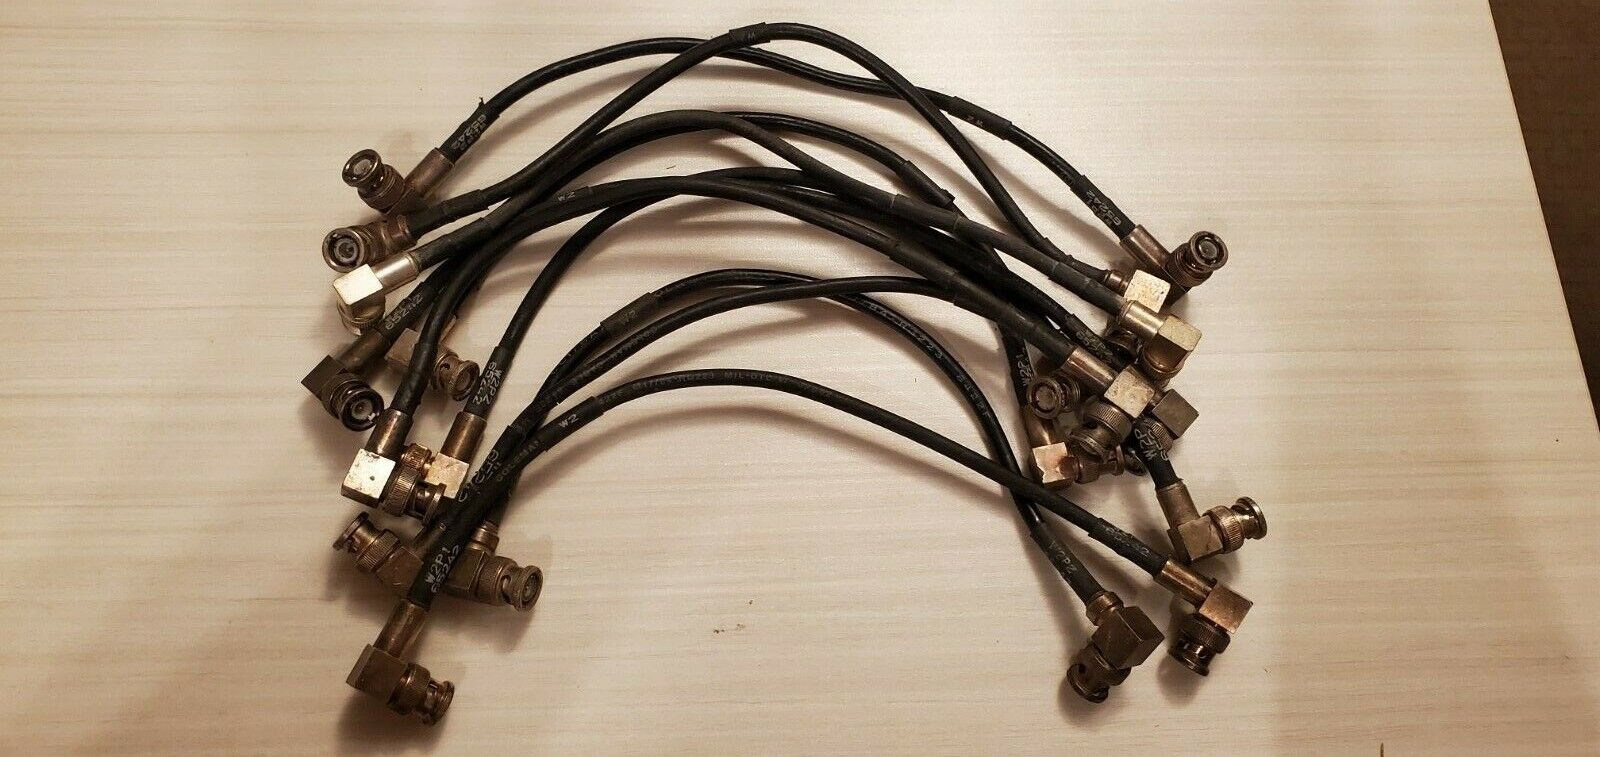 Radio Frequency Cable Assembly A3013824-3 NSN 5995-01-304-2026 Cecom